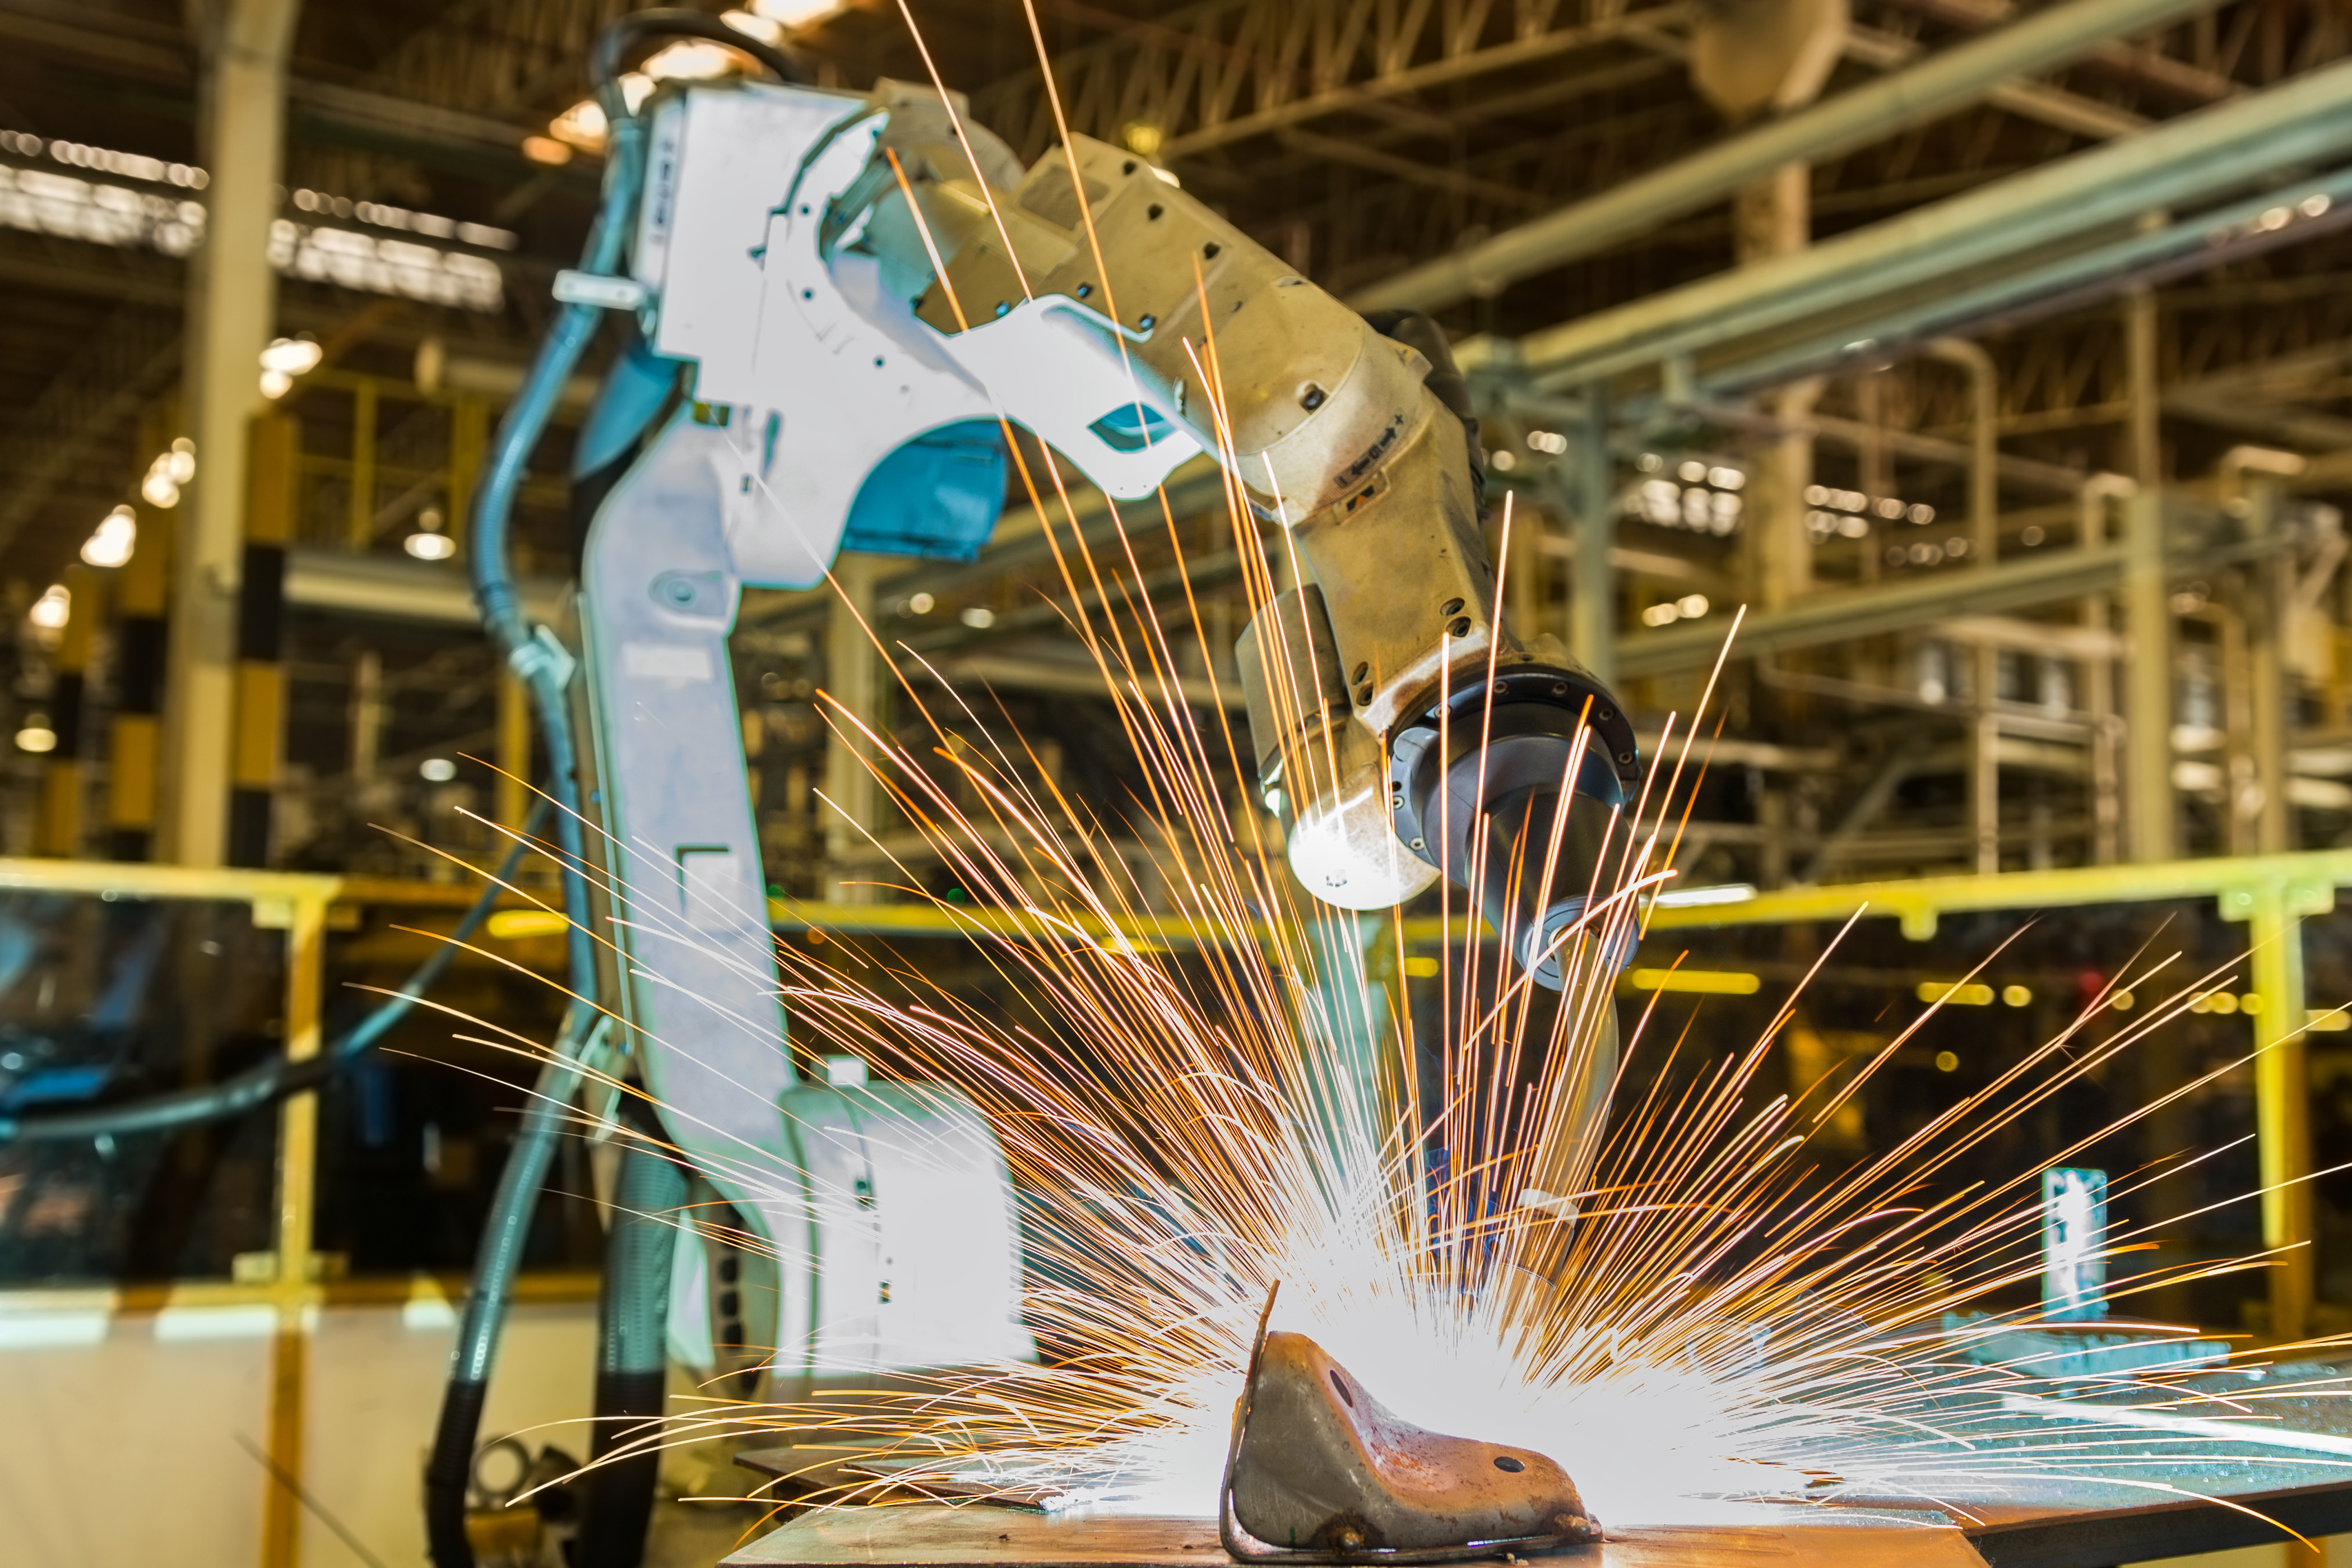 The welding platform is compatible with existing welding technology. Source: Adobe stock/bobo1980